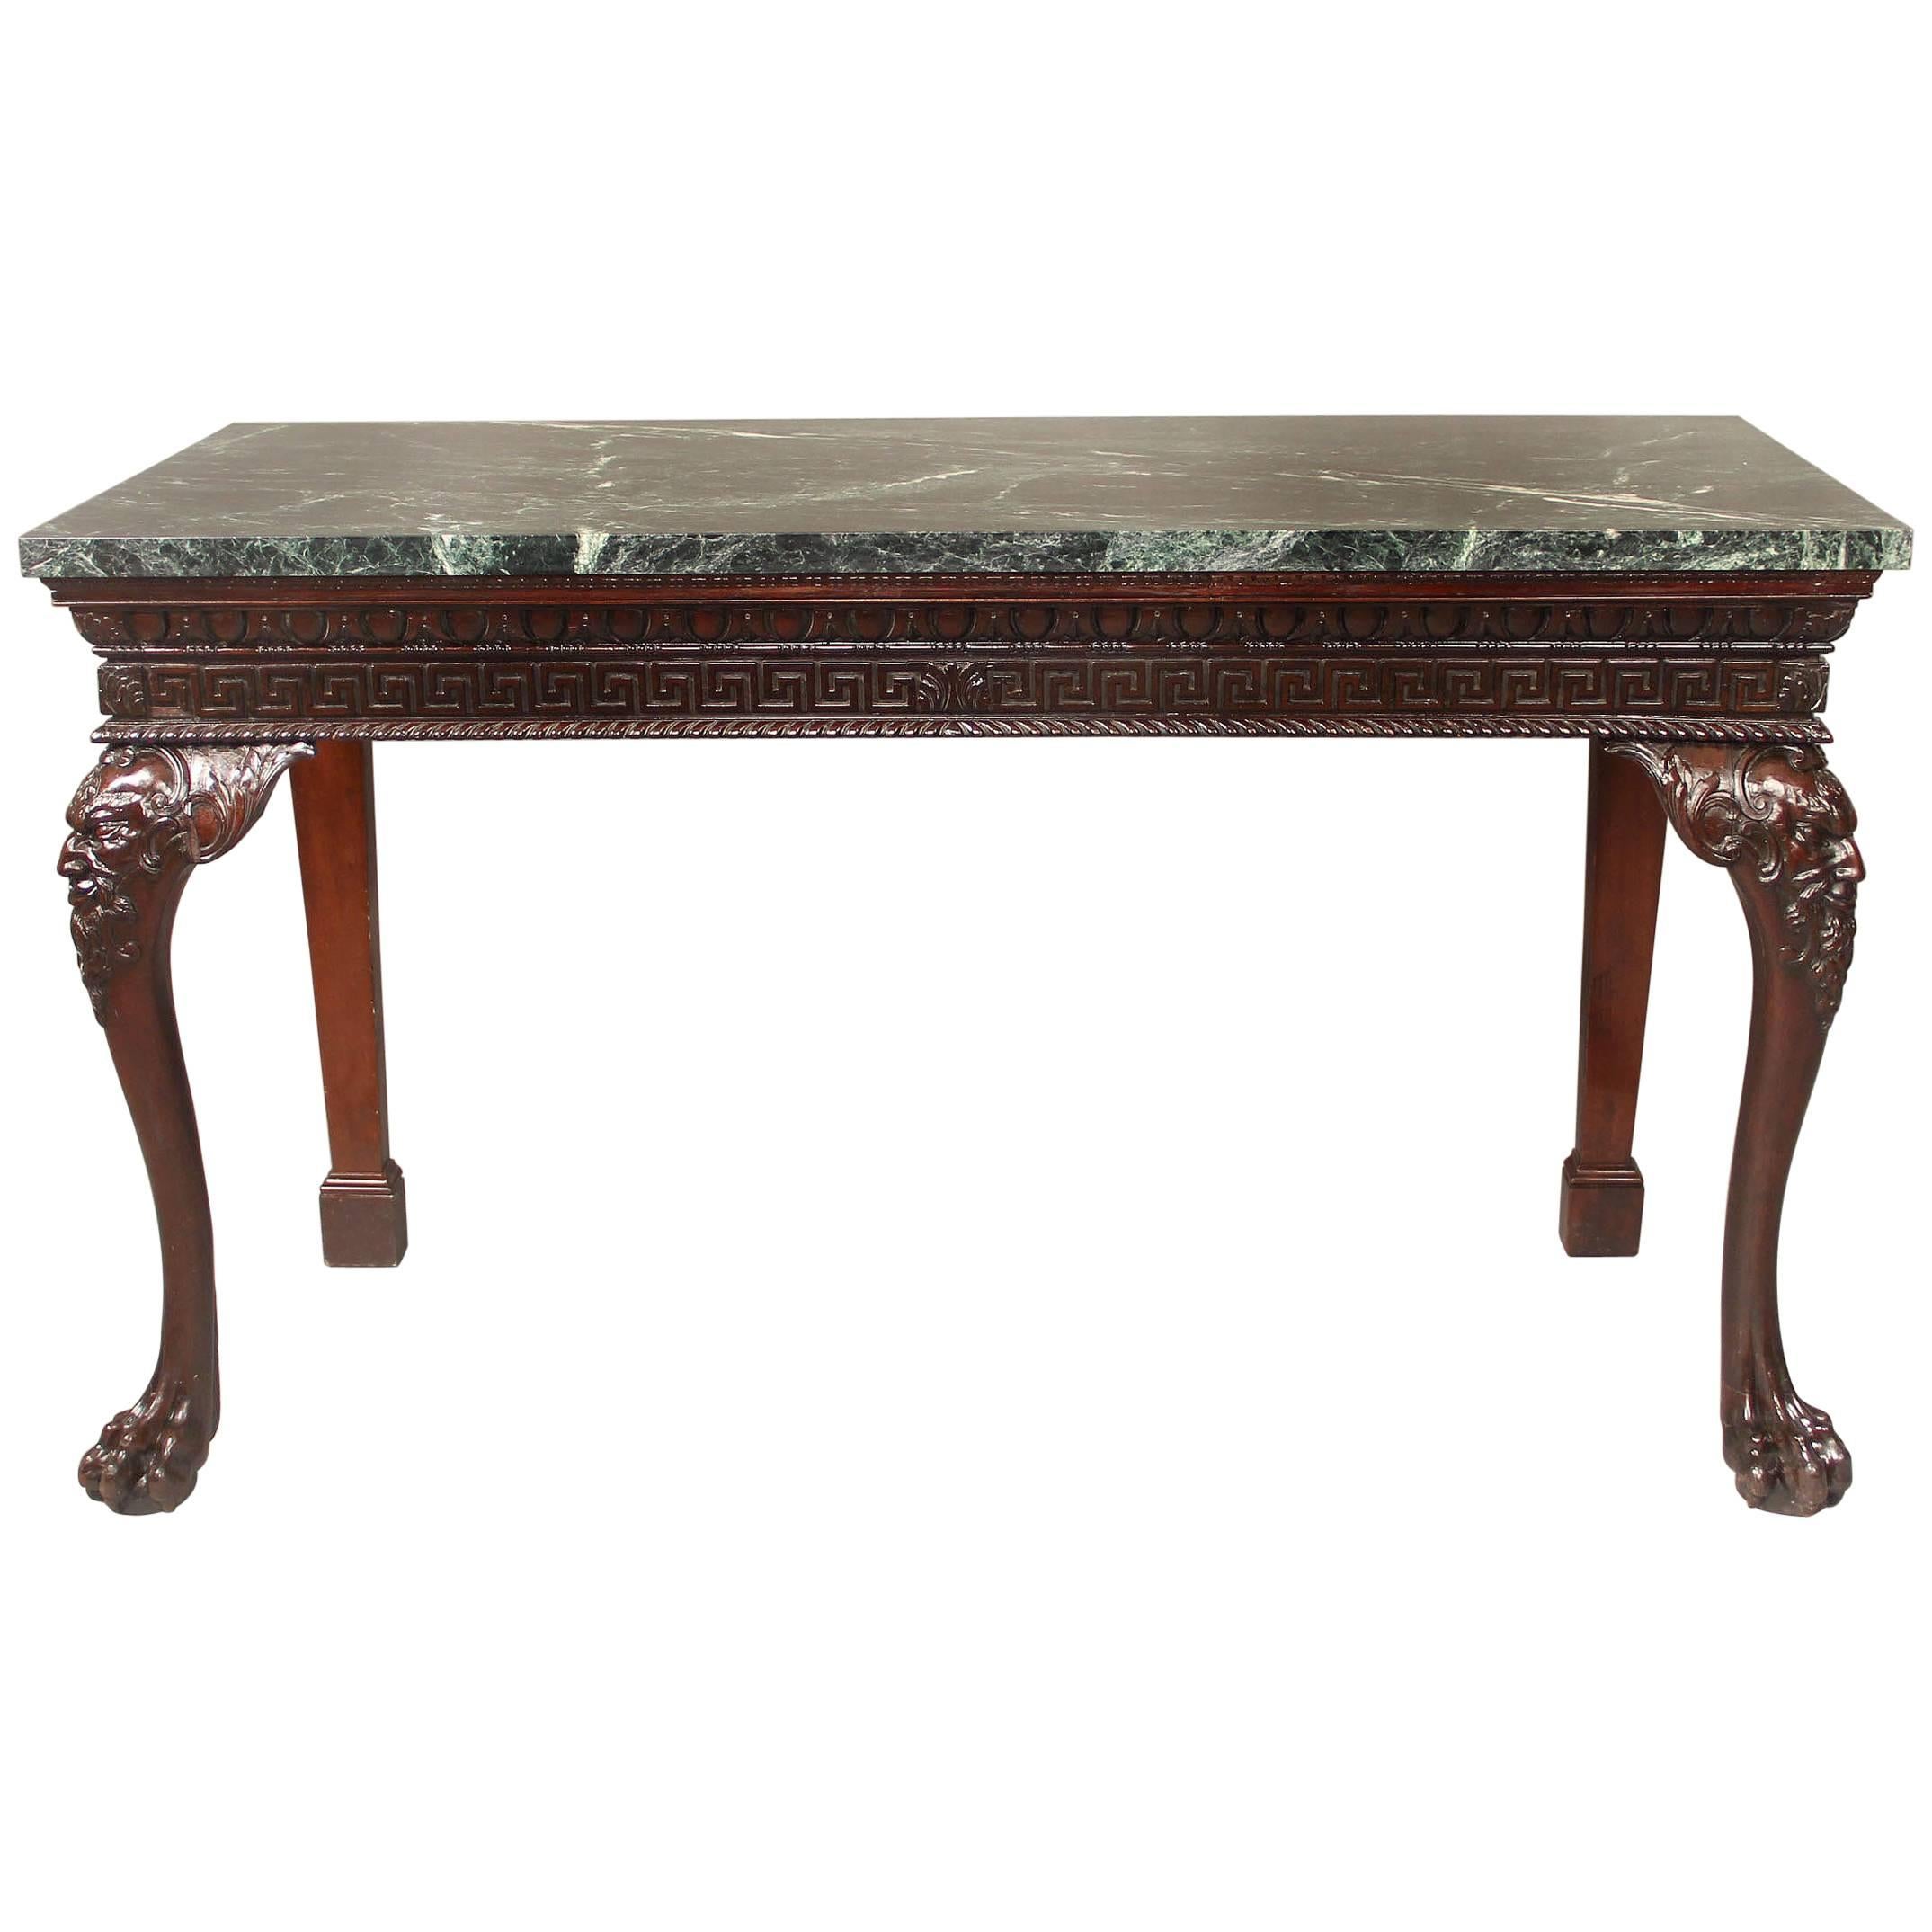 Interesting Late 19th Century Carved Wood English Console